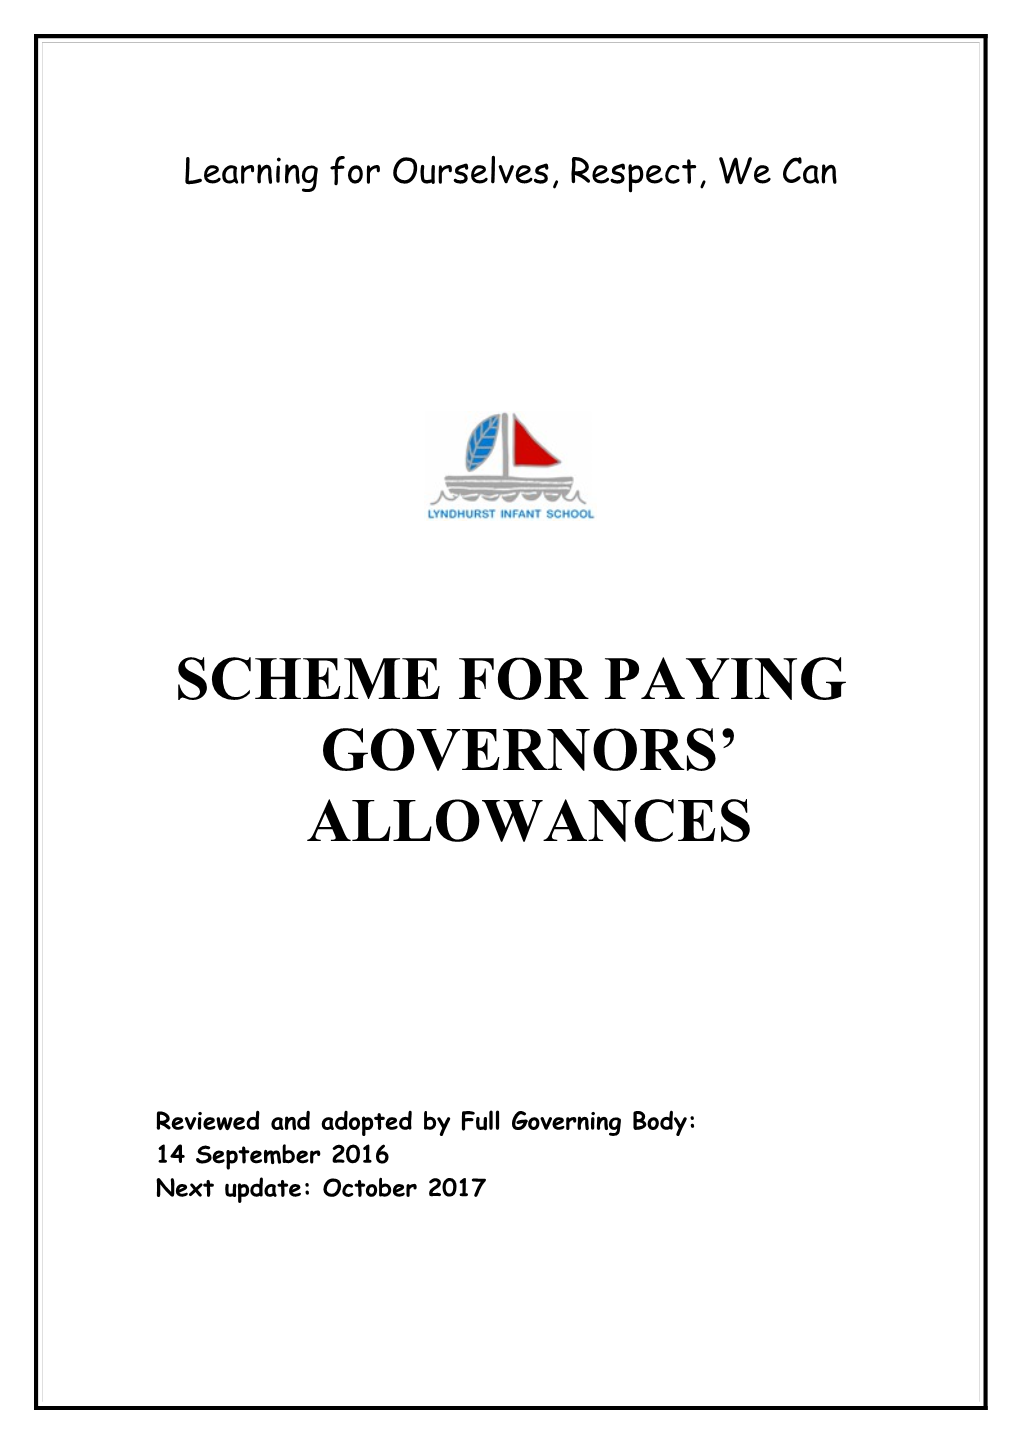 Bucks CC - Model Scheme for Paying Governors' Allowances